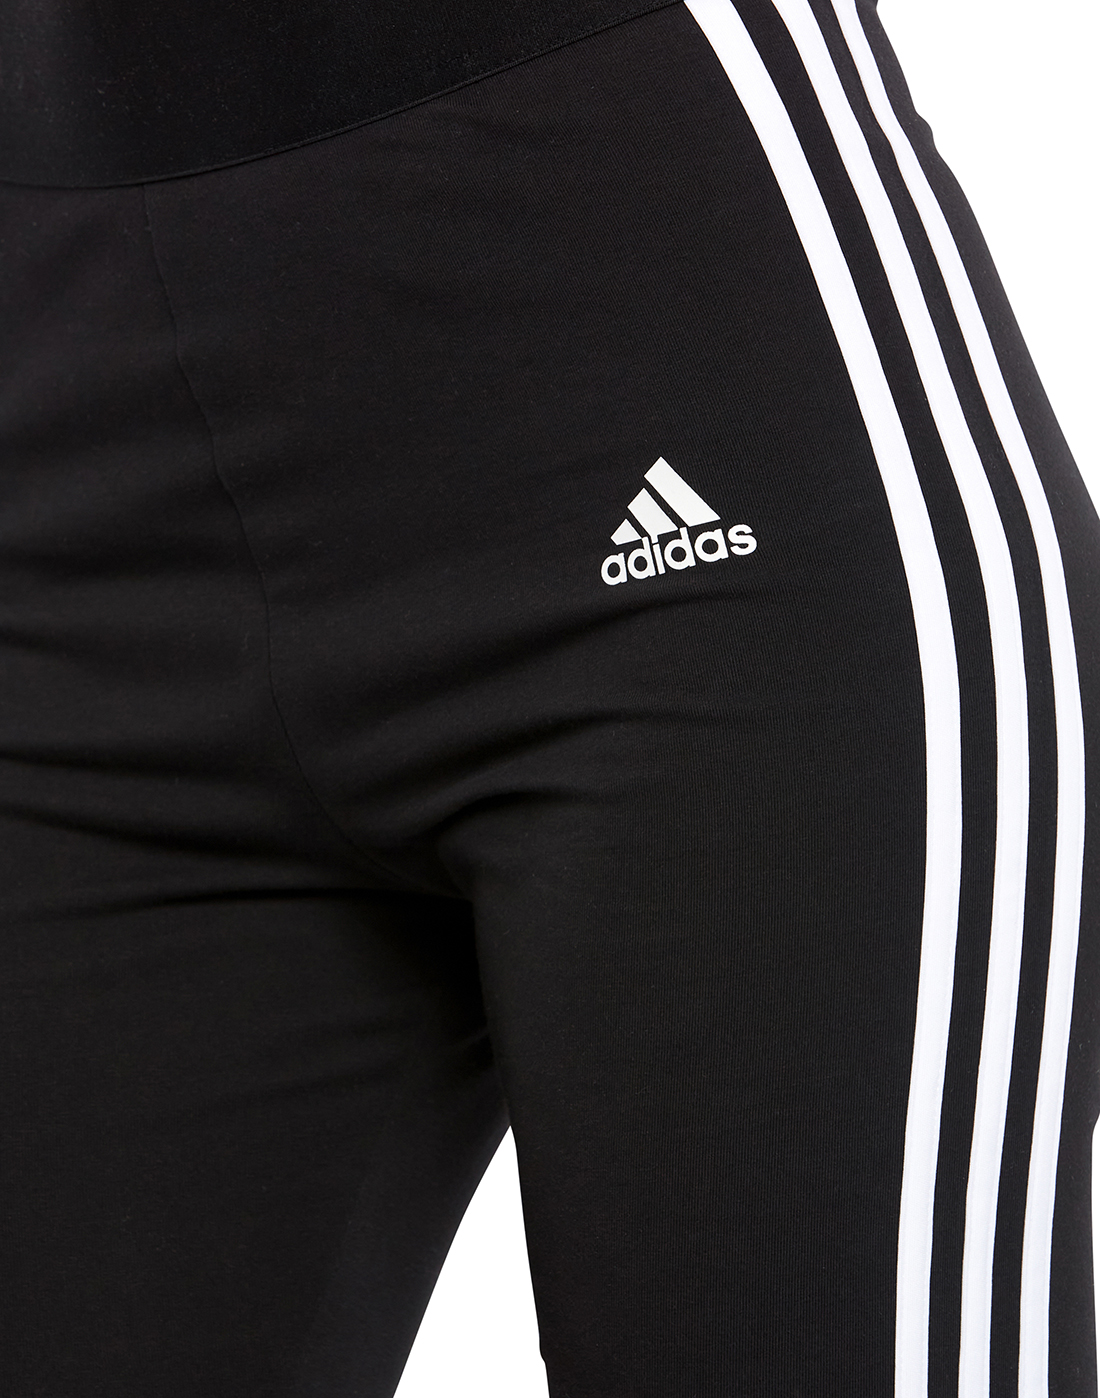 adidas Womens MH CO Shorts - Black | Life Style Sports IE